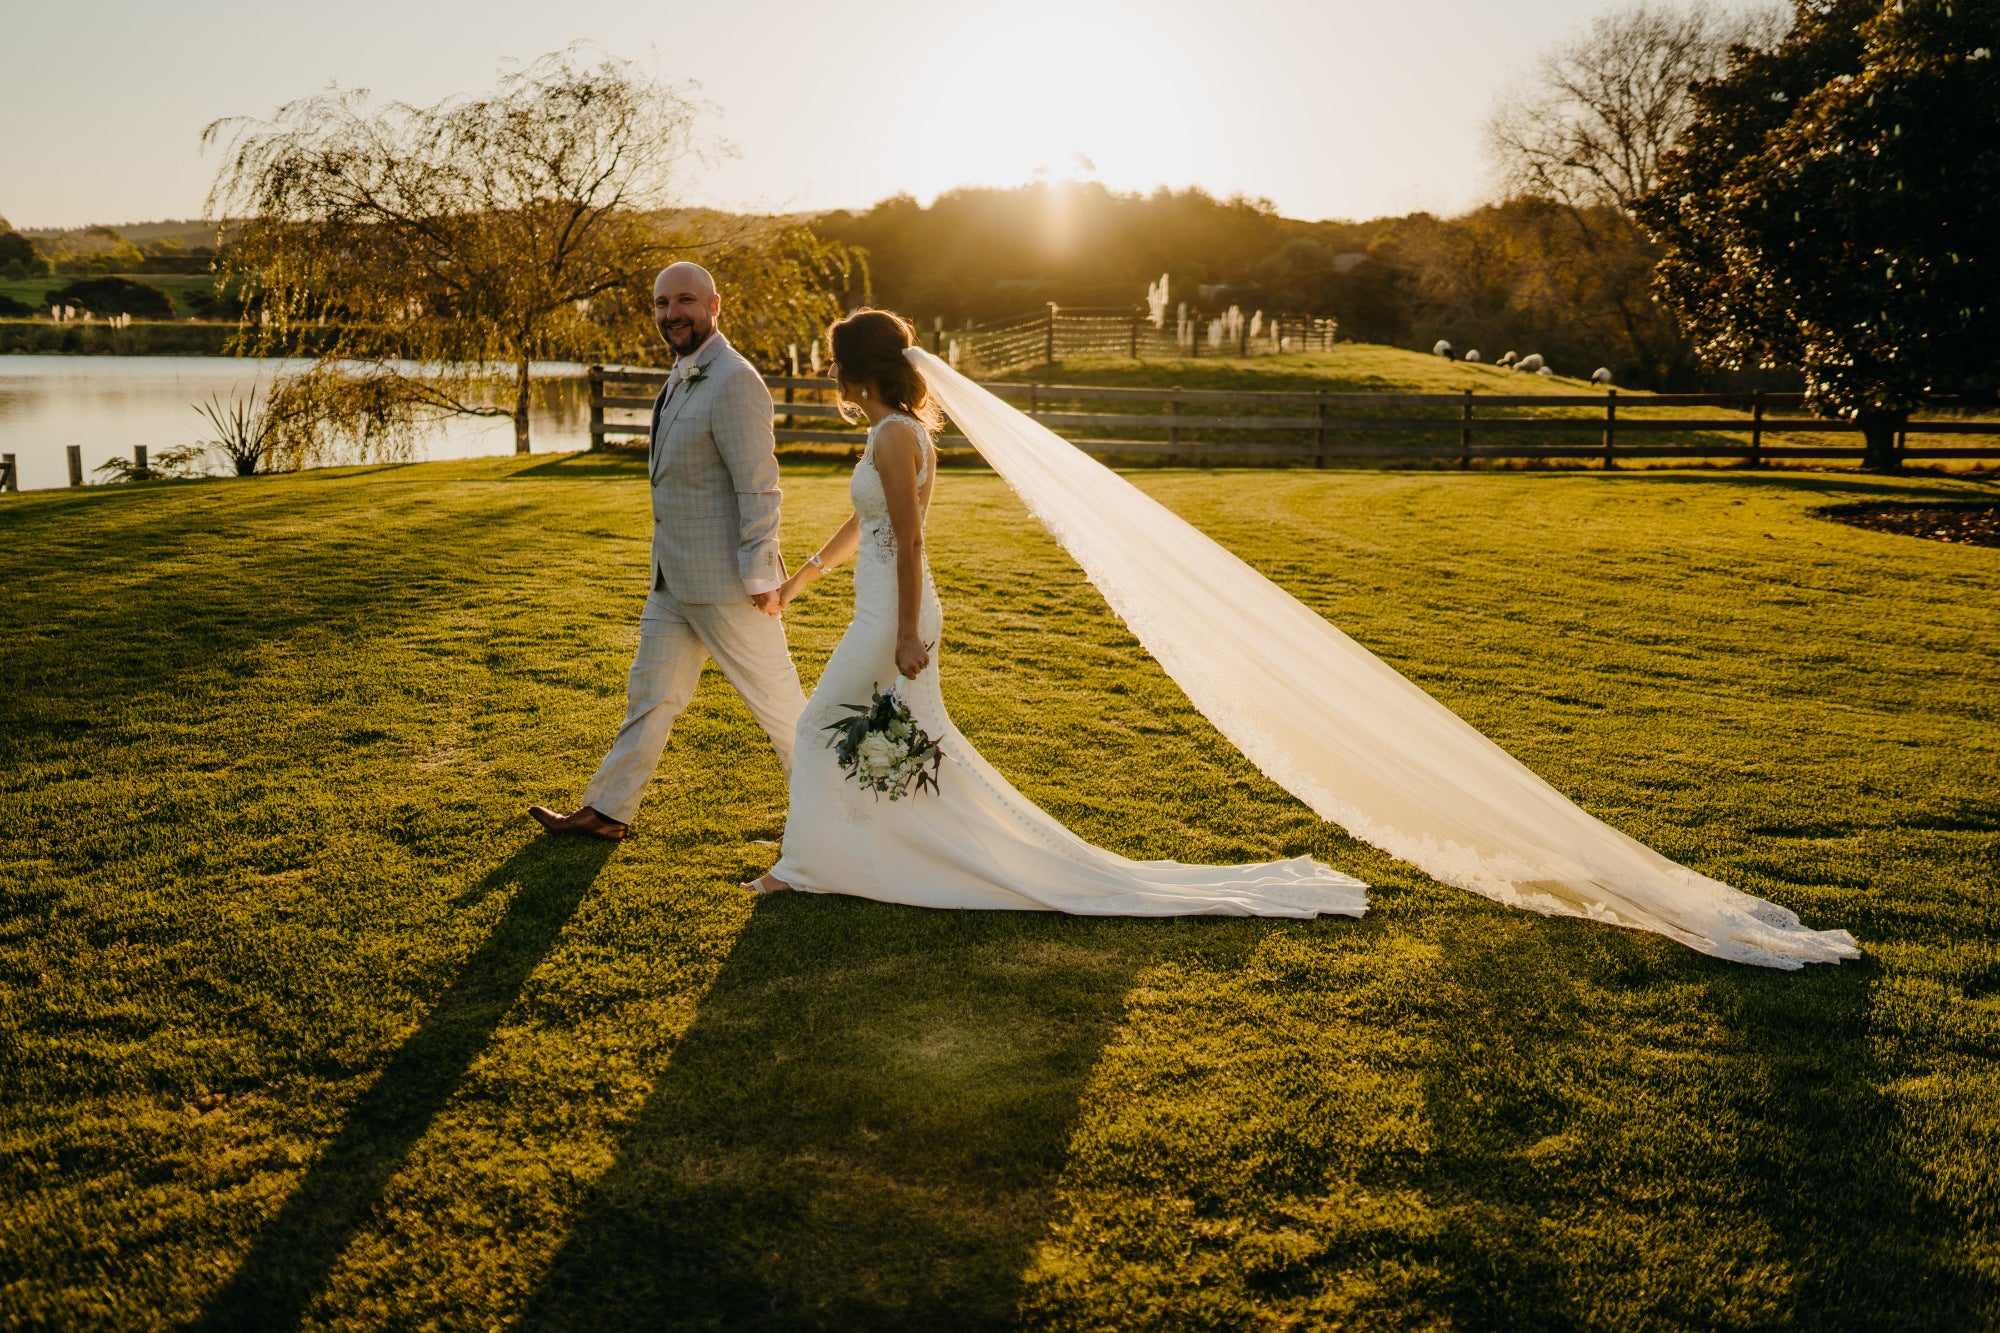 Sarah and Mike Wedding at Golden Hour | The Boathouse Riverhead | The Paper Gazelle